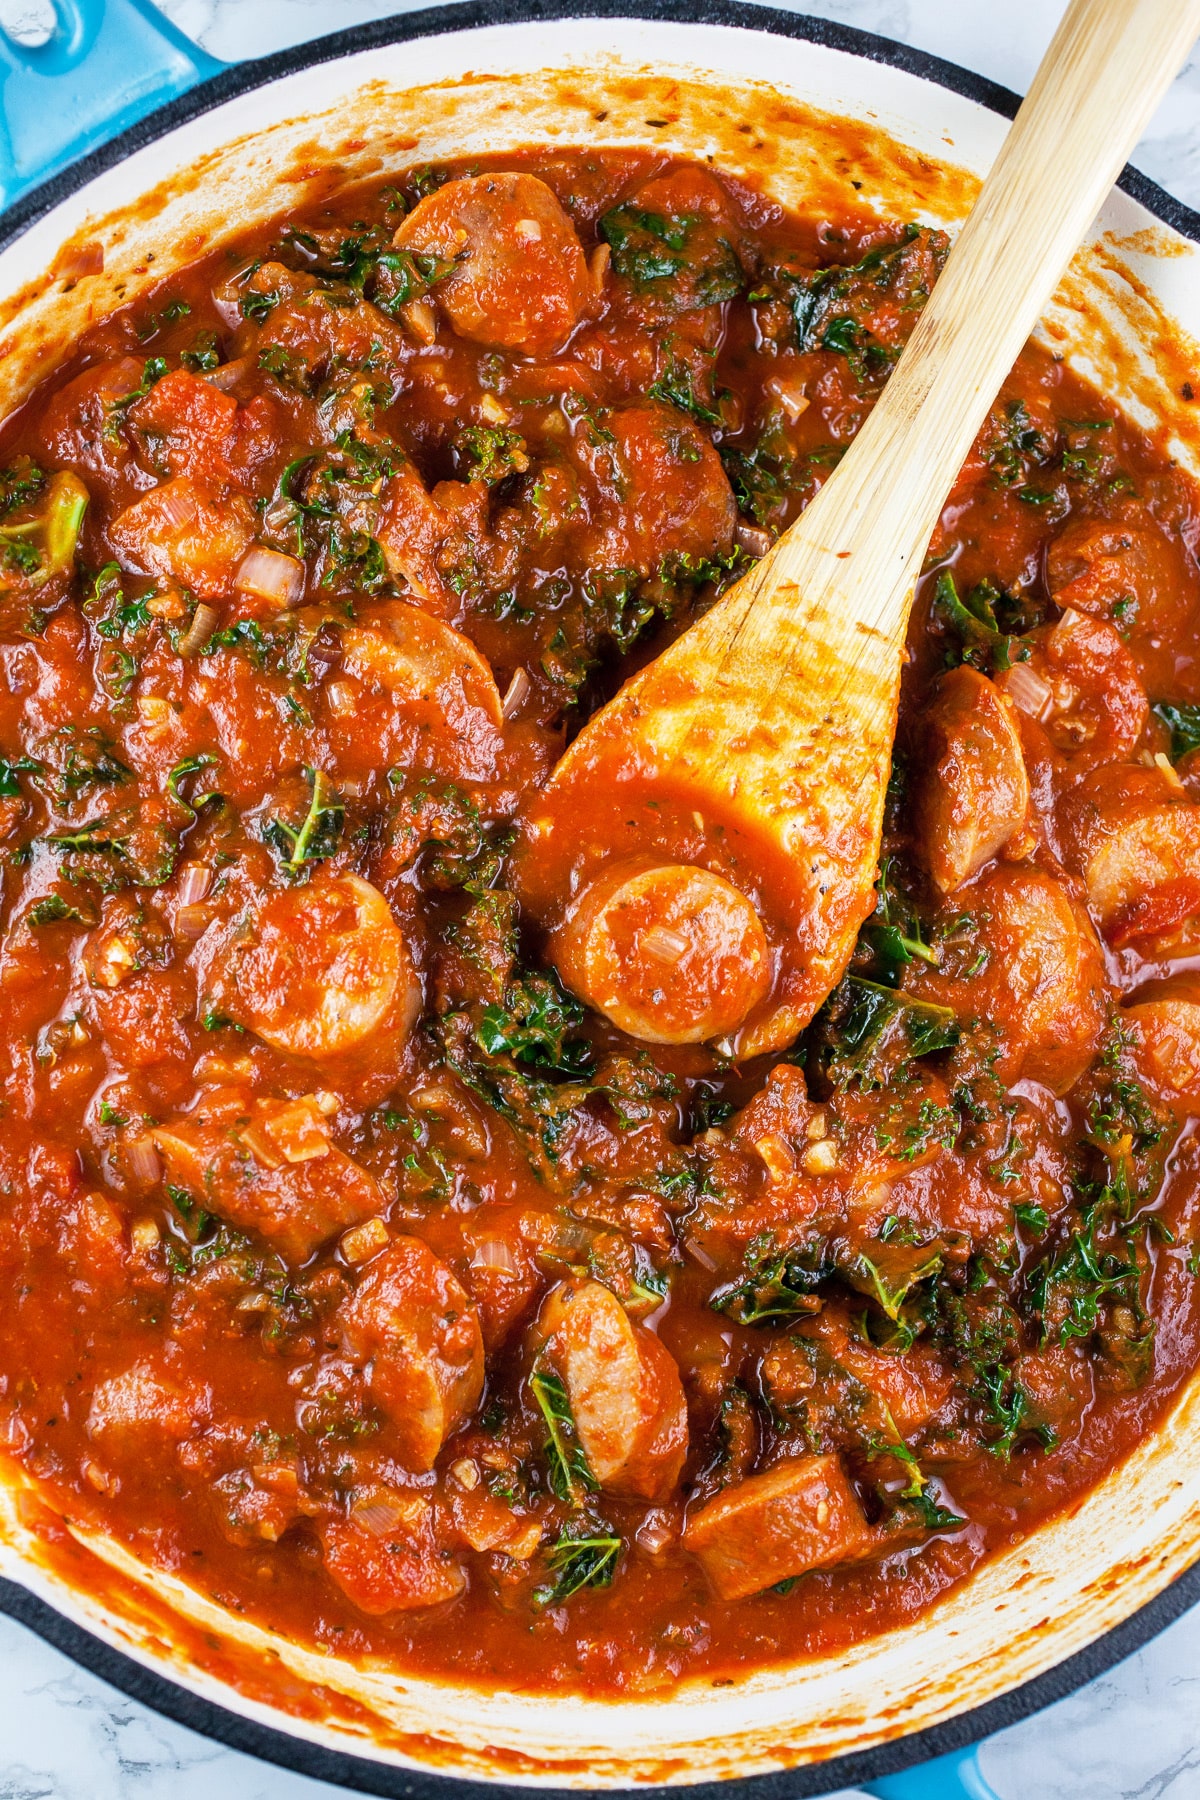 Chicken sausage and kale simmered in spaghetti sauce in skillet.